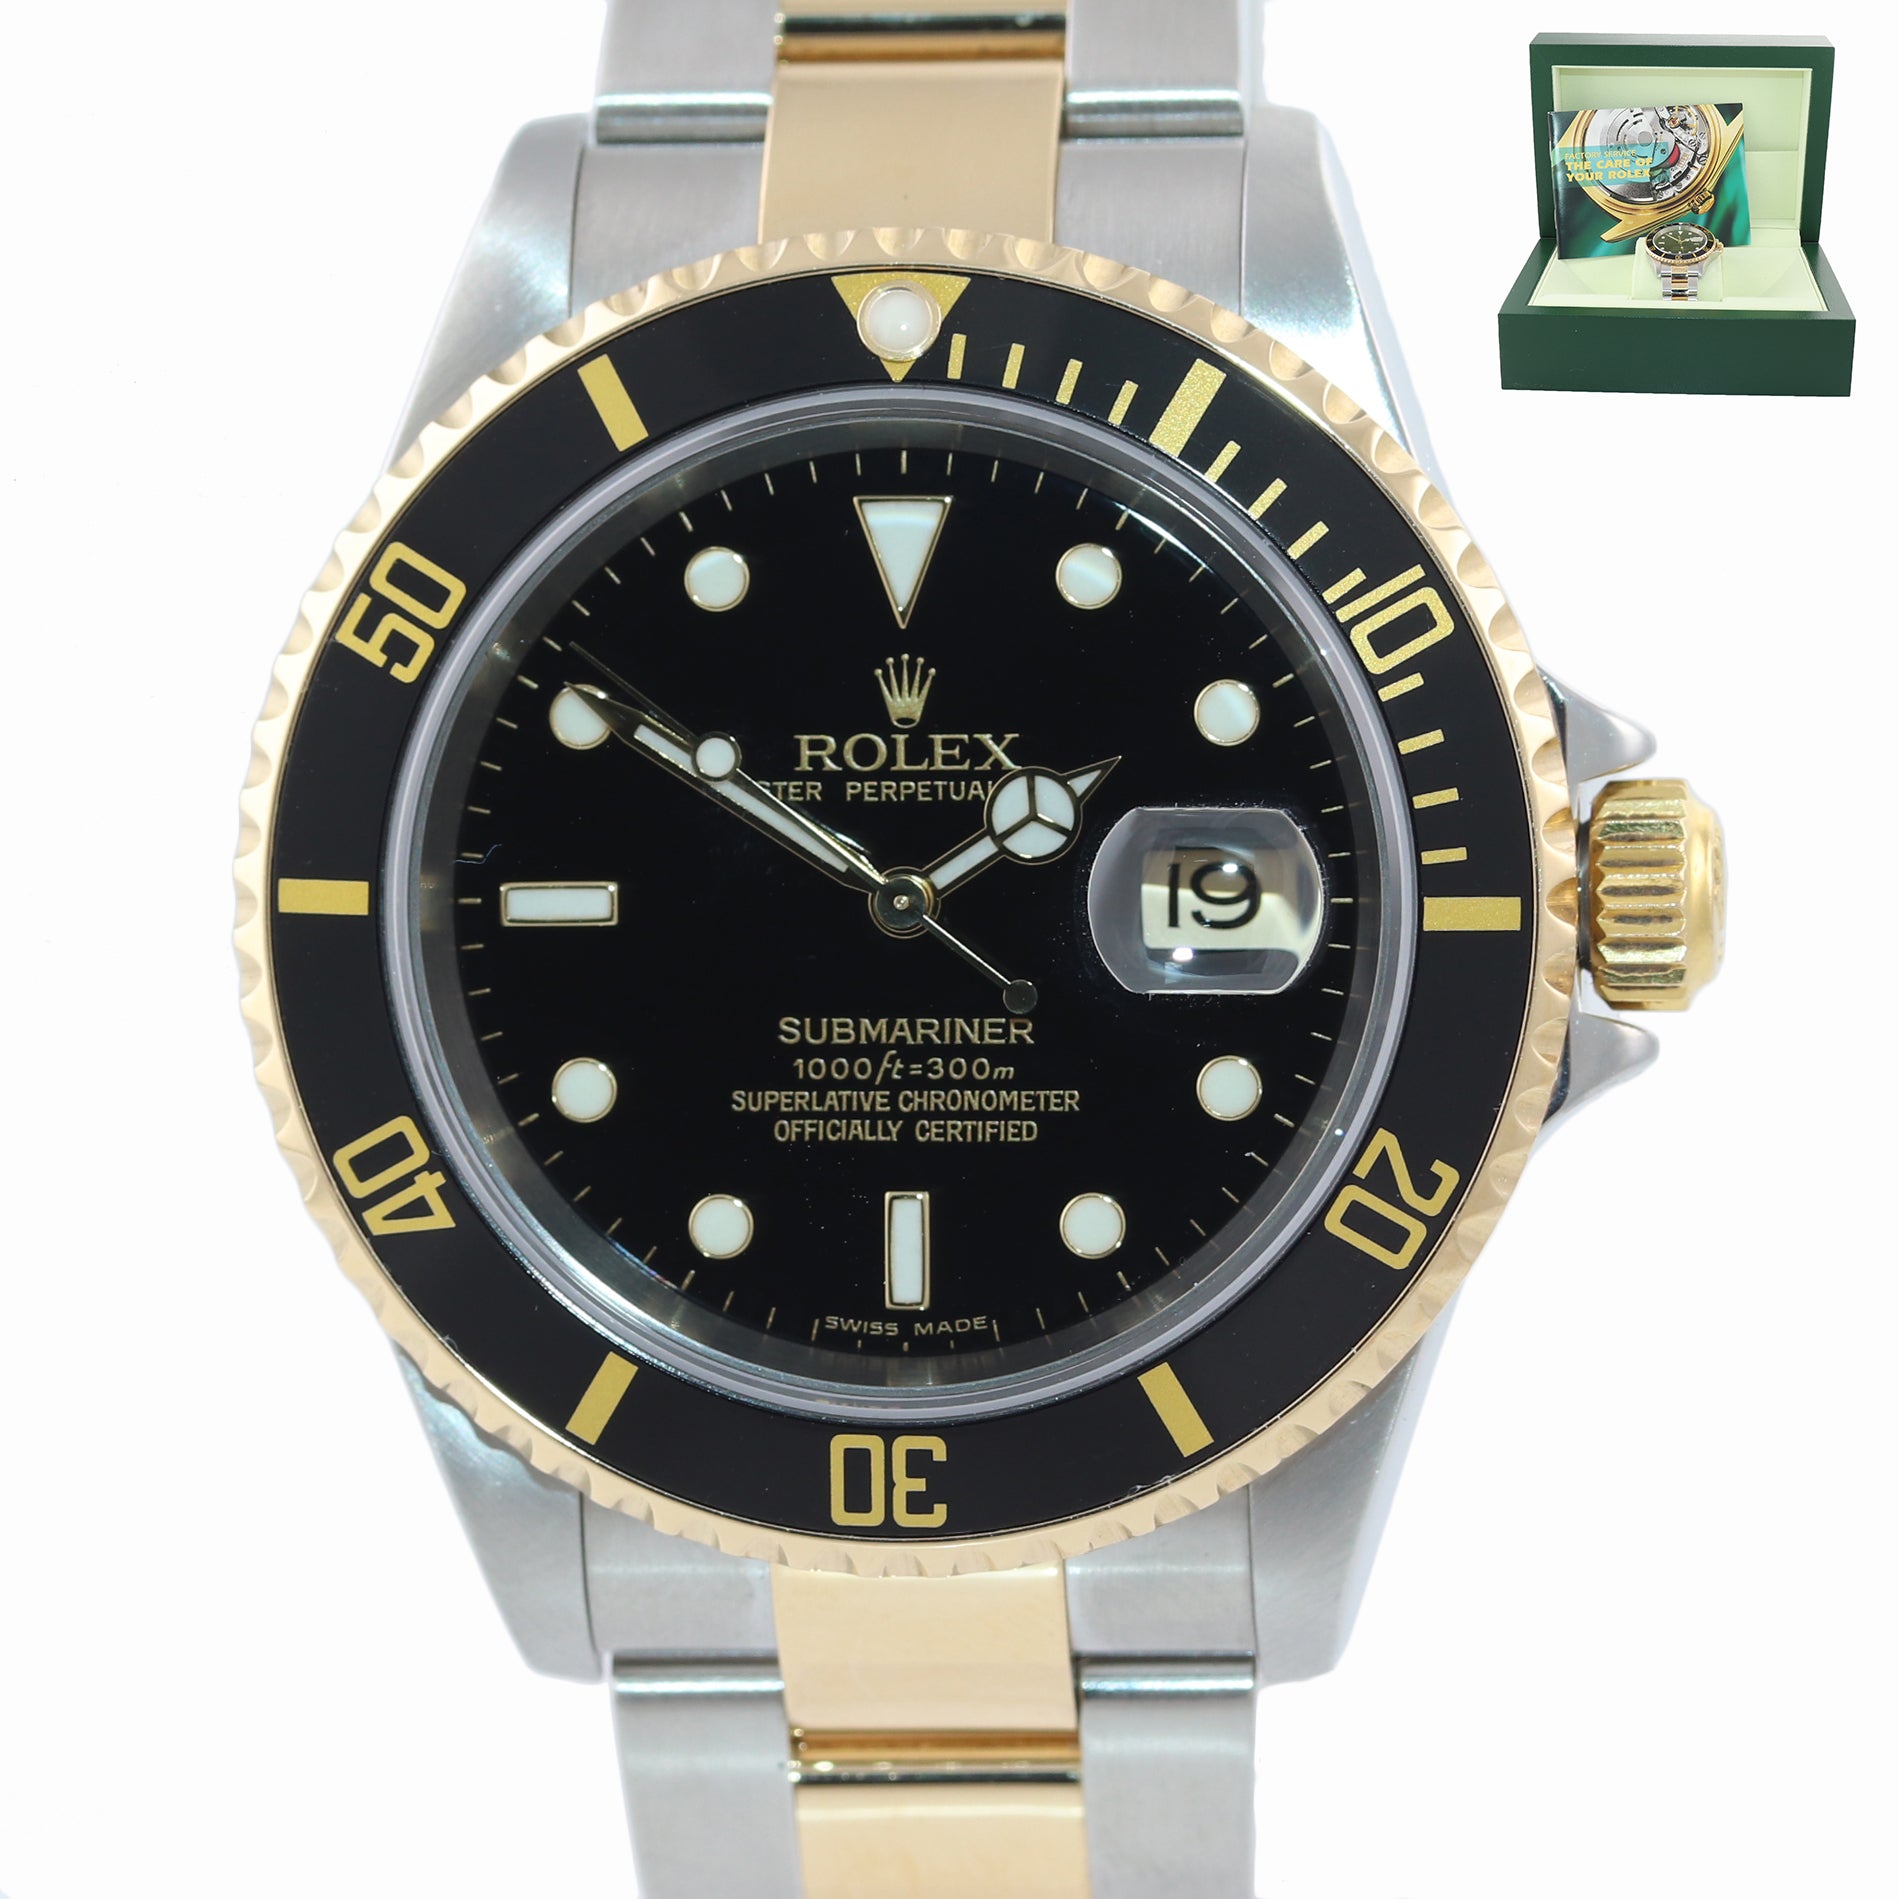 MINT 2005 NO HOLES Rolex Submariner 16613 Two Tone  Gold Black SEL Watch BOX